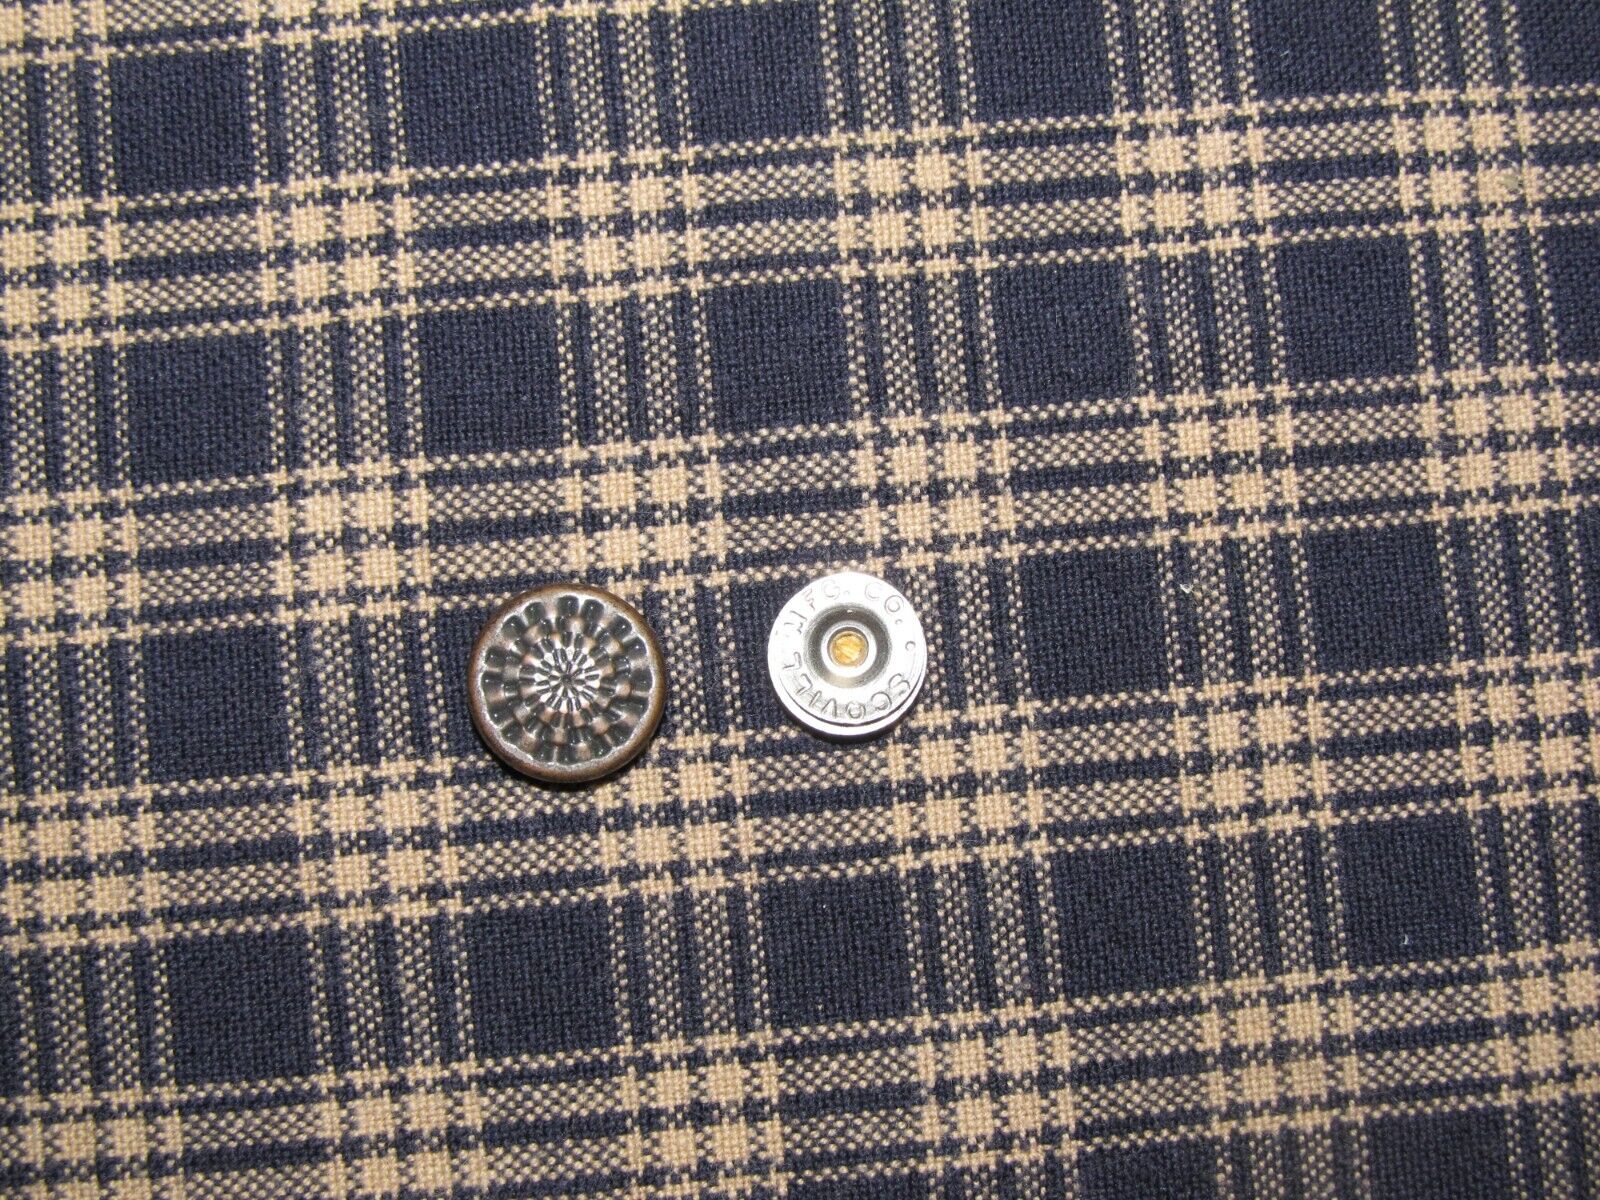 Scovill Mfg Co Replacement Vintage Snap Metal Button Vintage 1/2\